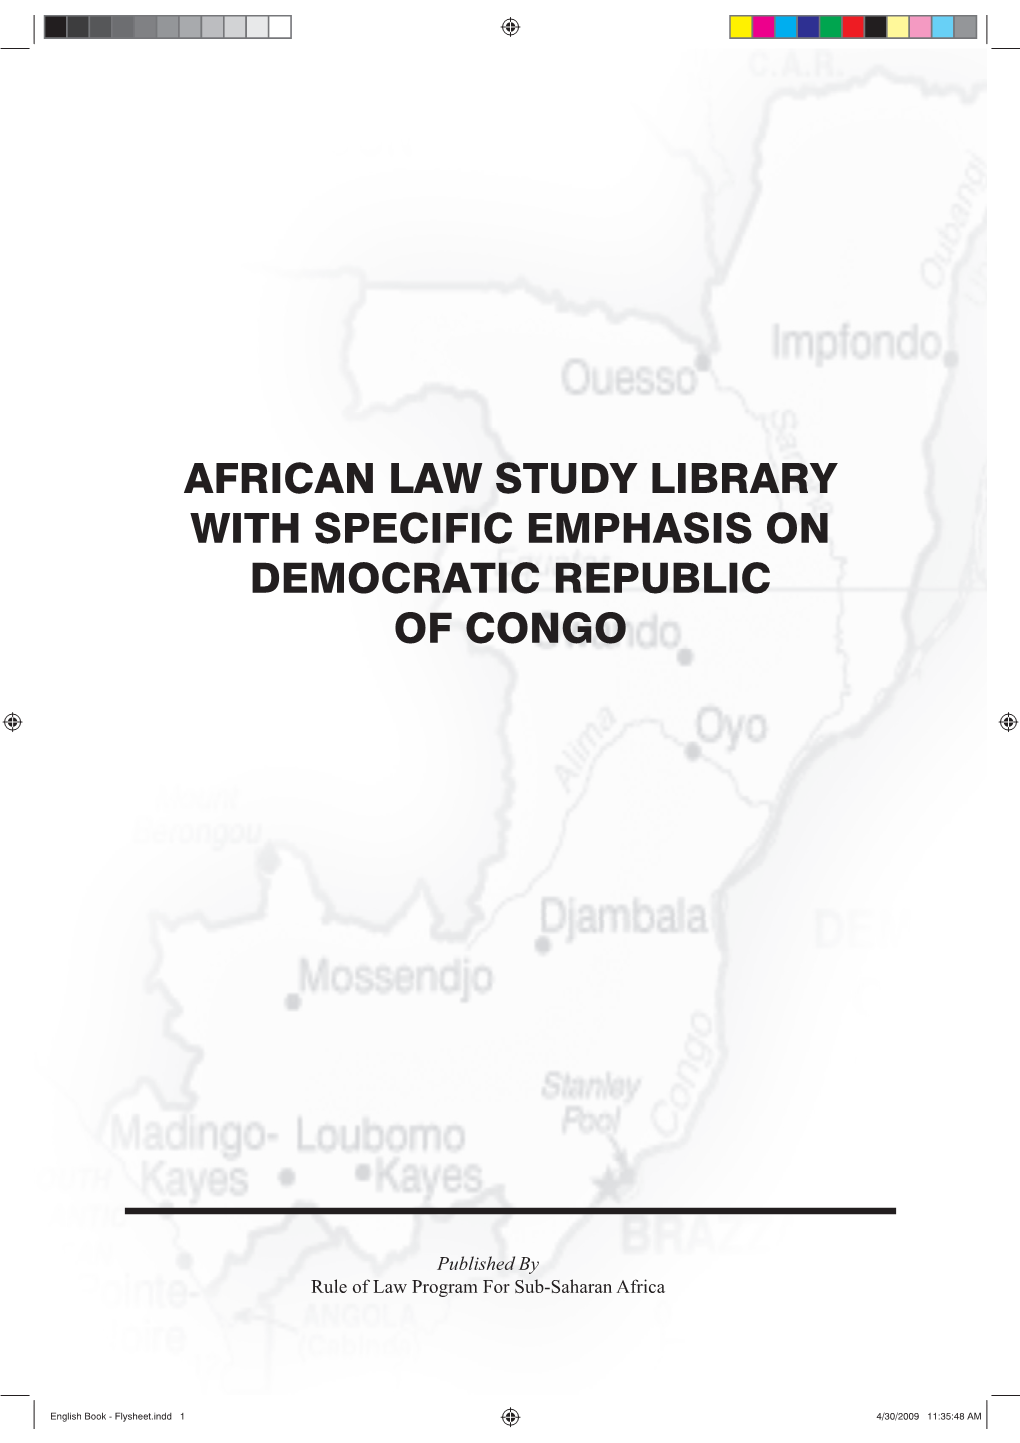 African Law Study Library with Specific Emphasis on Democratic Republic of Congo